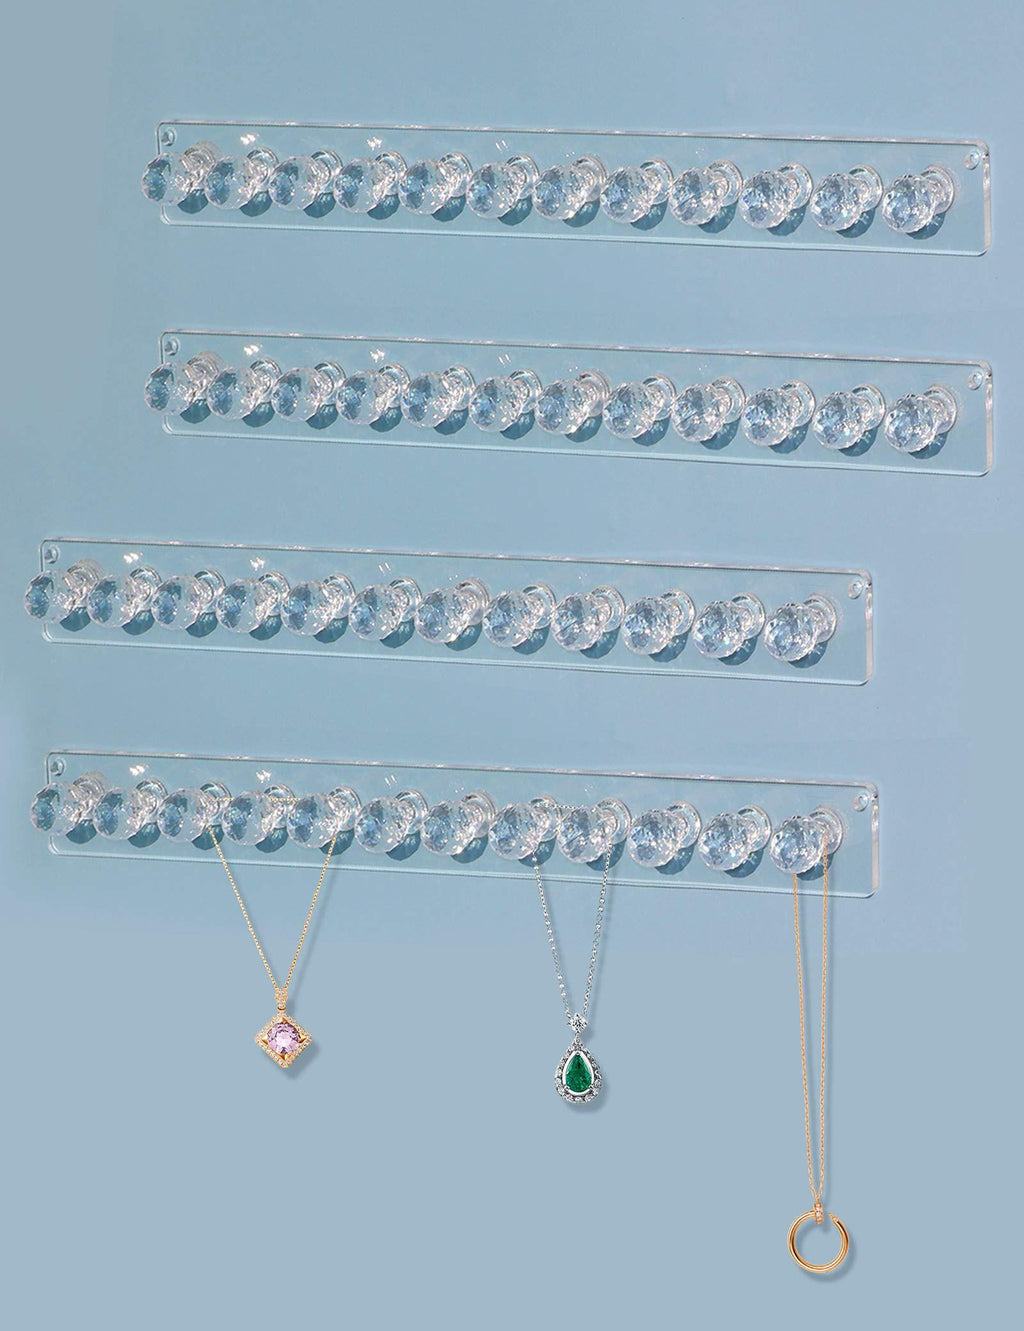 [Australia] - Heesch Necklace Hanger, Acrylic Necklace Organizer Wall Mount Necklace Holder, Jewelry Hooks for Necklaces, Bracelets, Chains (4-pack Clear) 4 